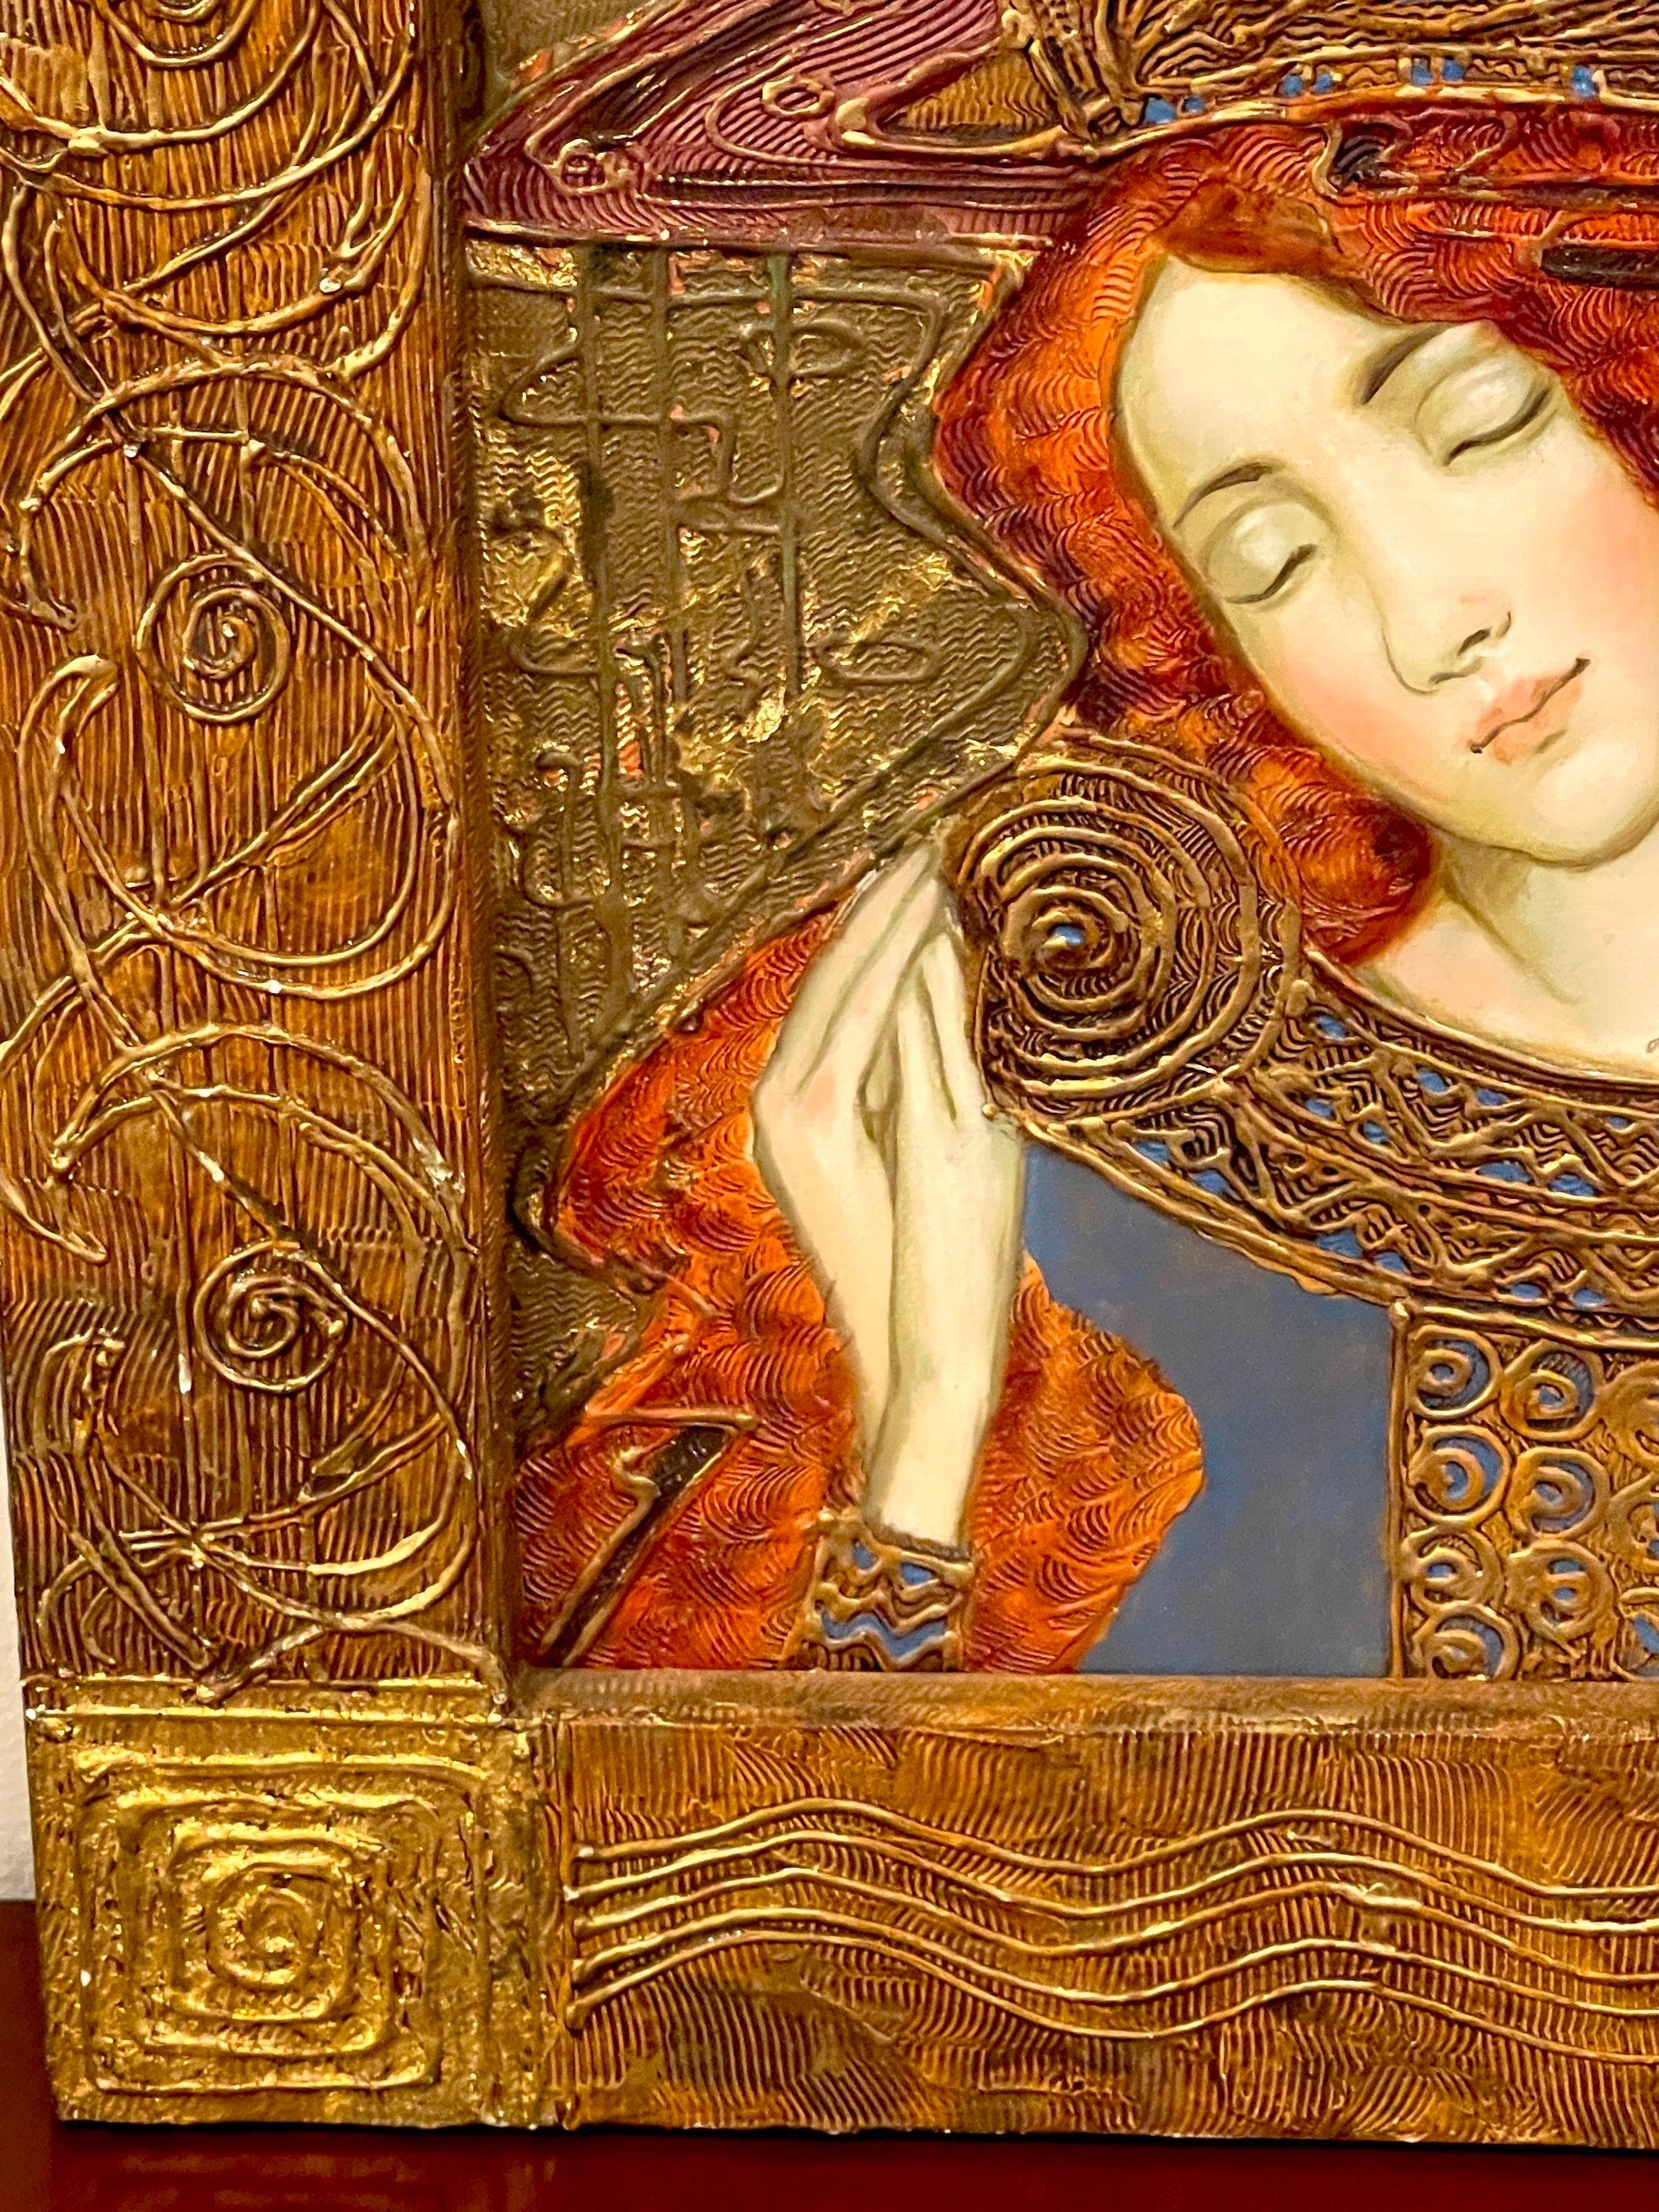 Enameled Russian Icon Style Painting 'The Thousand Dreams' by Eugeniy Titov, 2008